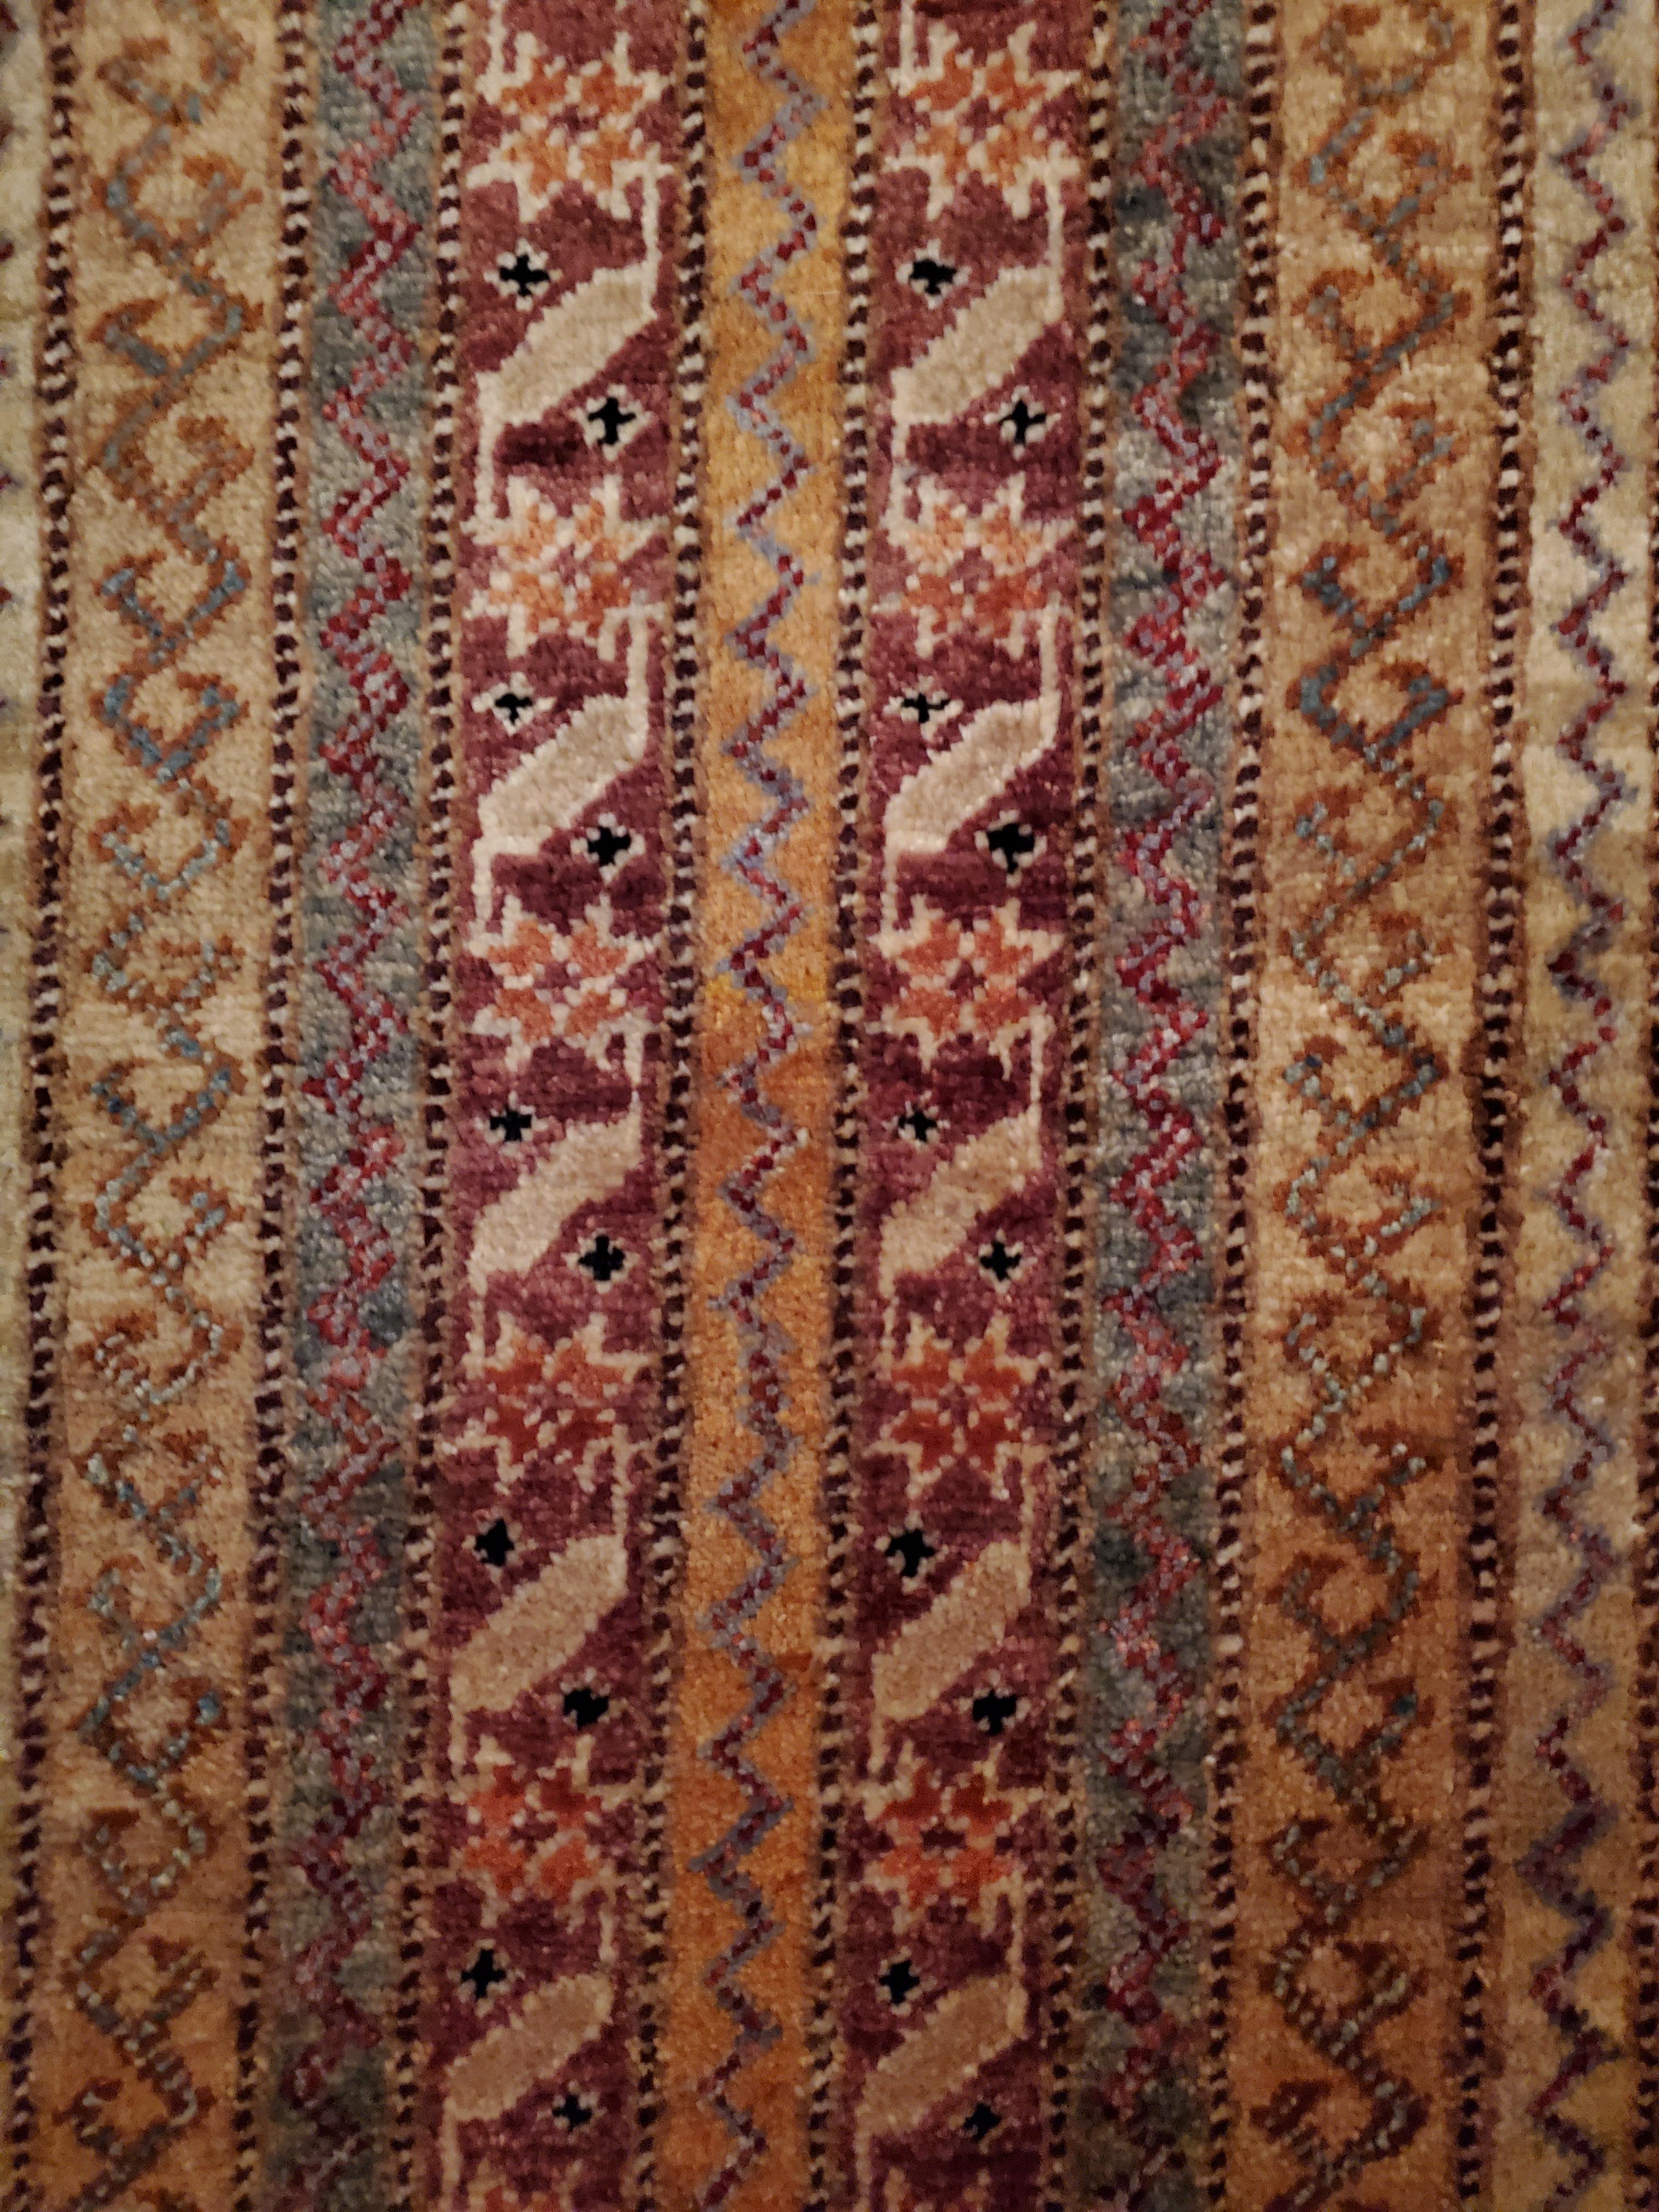 We carry some of the best Afghan / Persian small to medium size rugs, and if you are willing to give your space a colorful new look with one of our stunning carpets, we are here to help. This one measures approximately 40